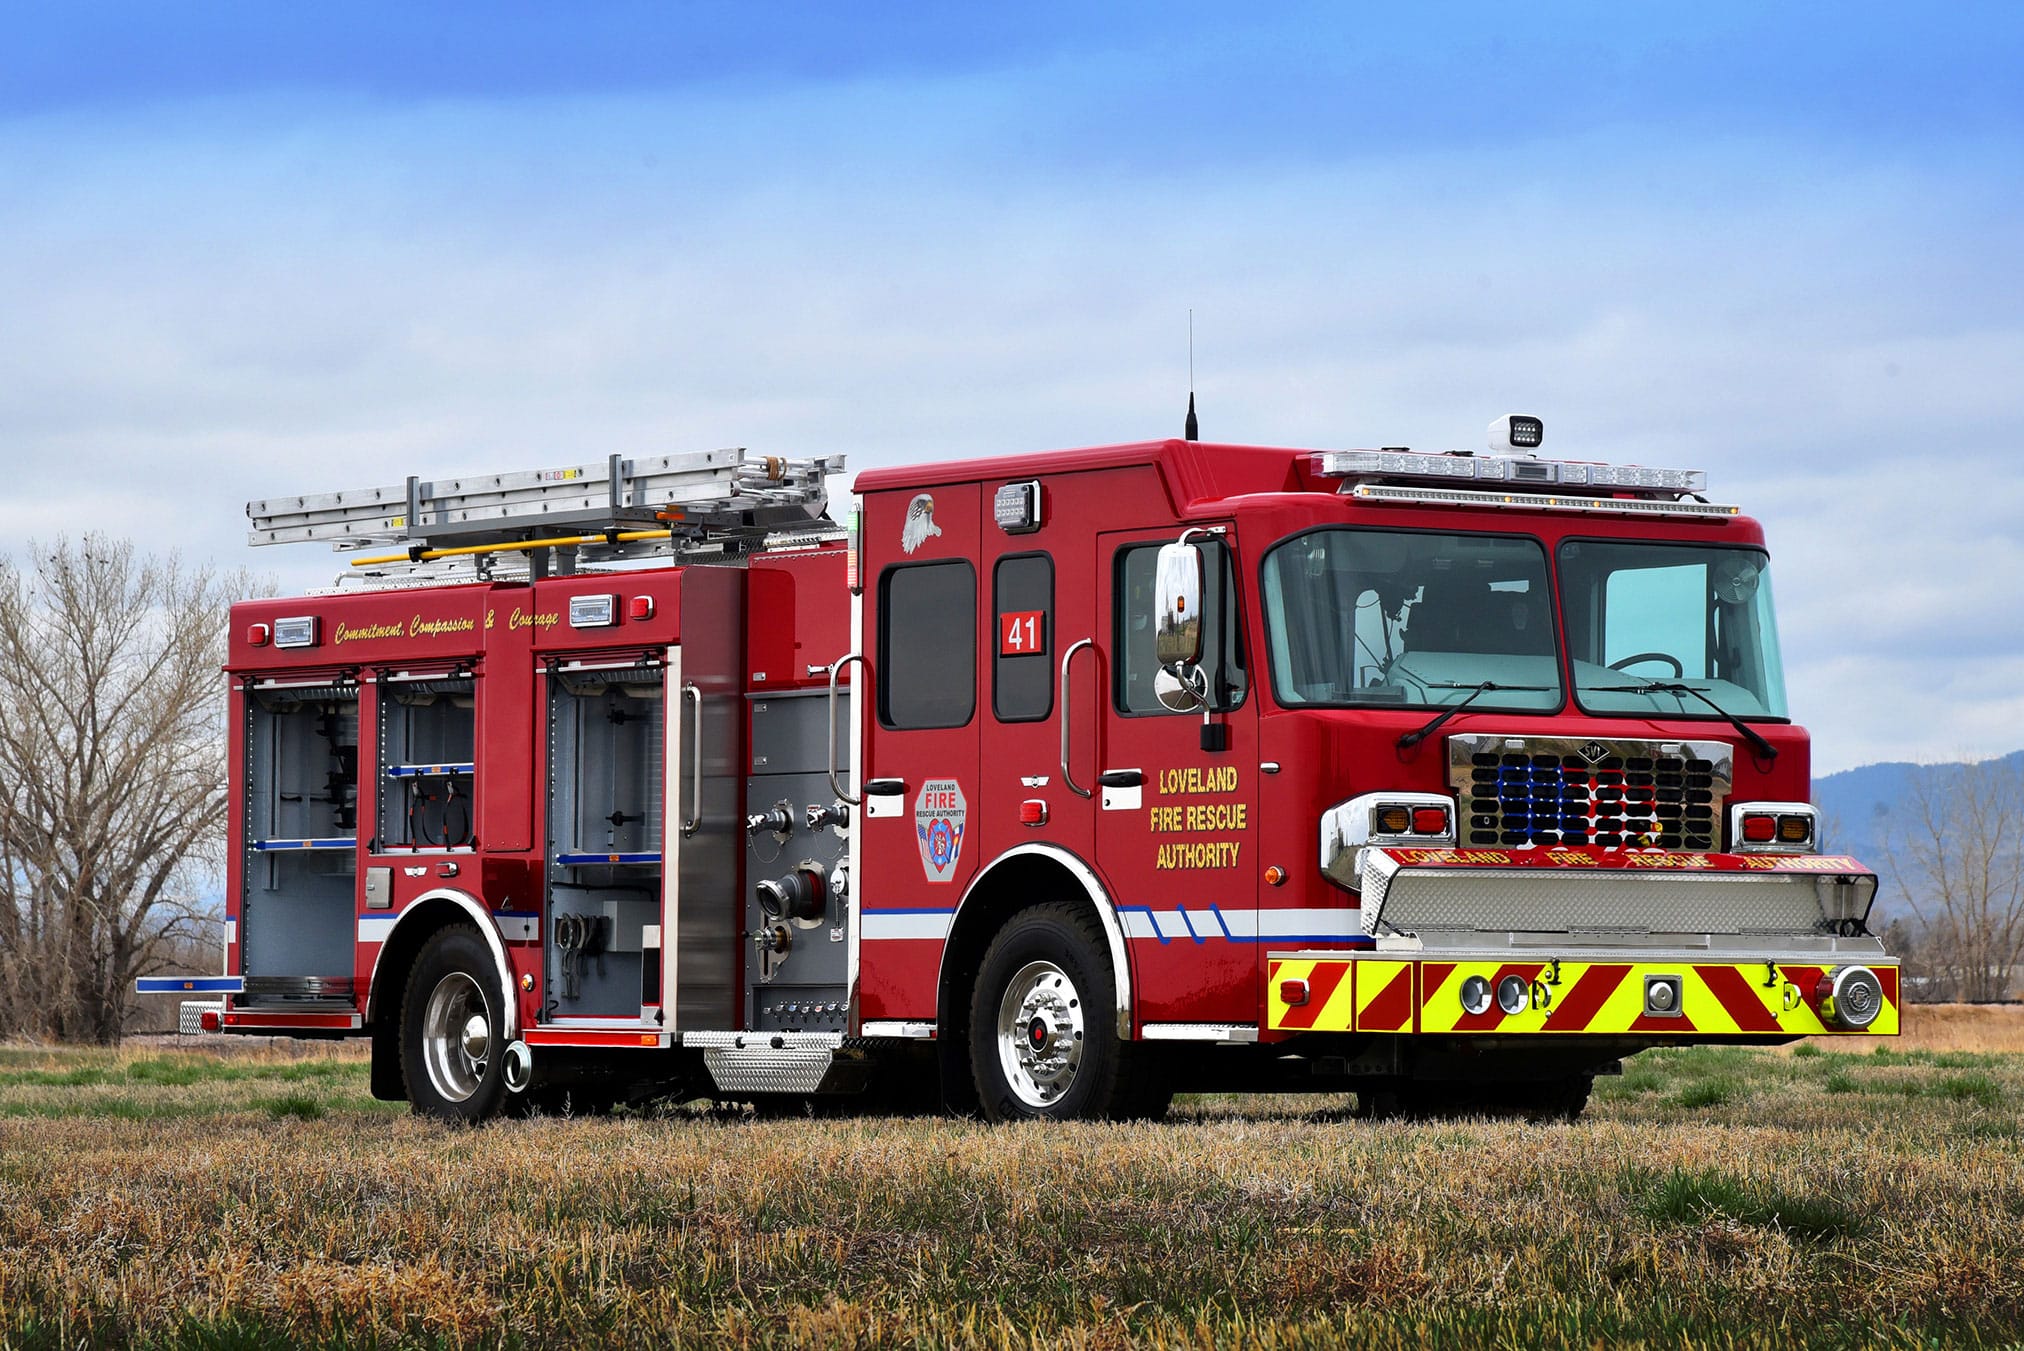 Featured image for “Loveland Fire Rescue Authority Rescue Pumper #1158”